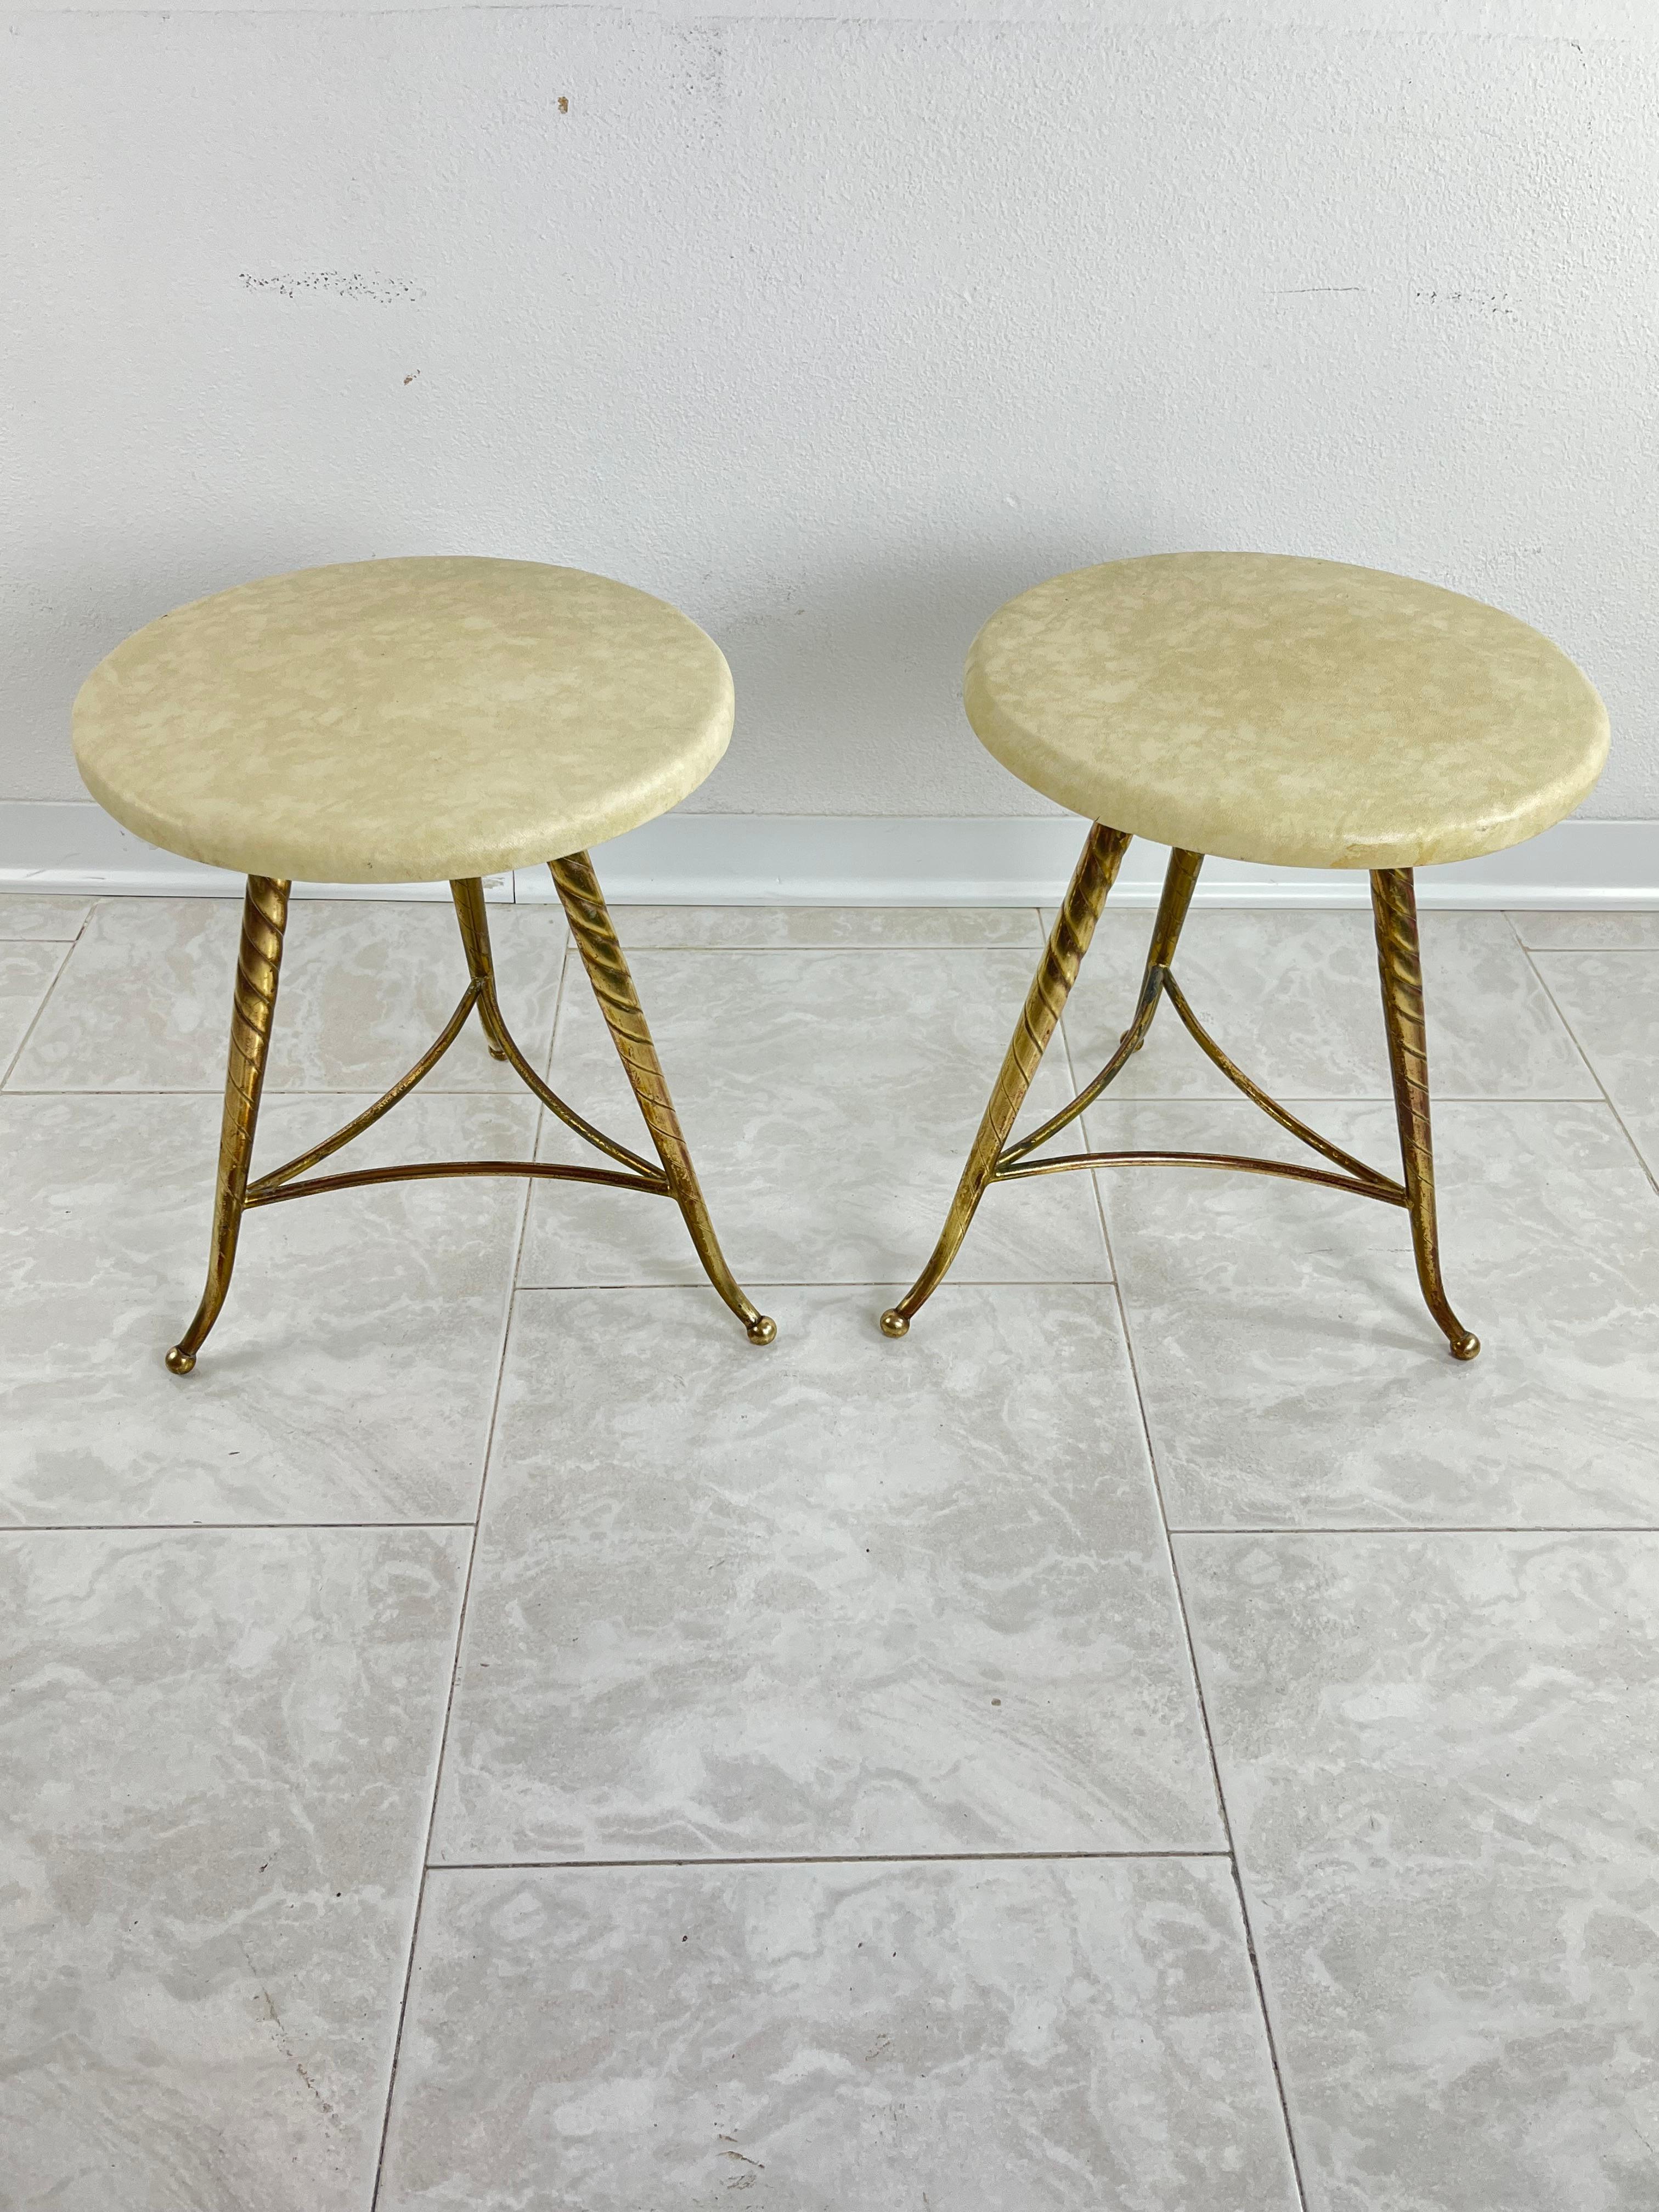 Italian Set of 2 Mid-Century Brass Stools Attributed to Paolo Buffa 1950s For Sale